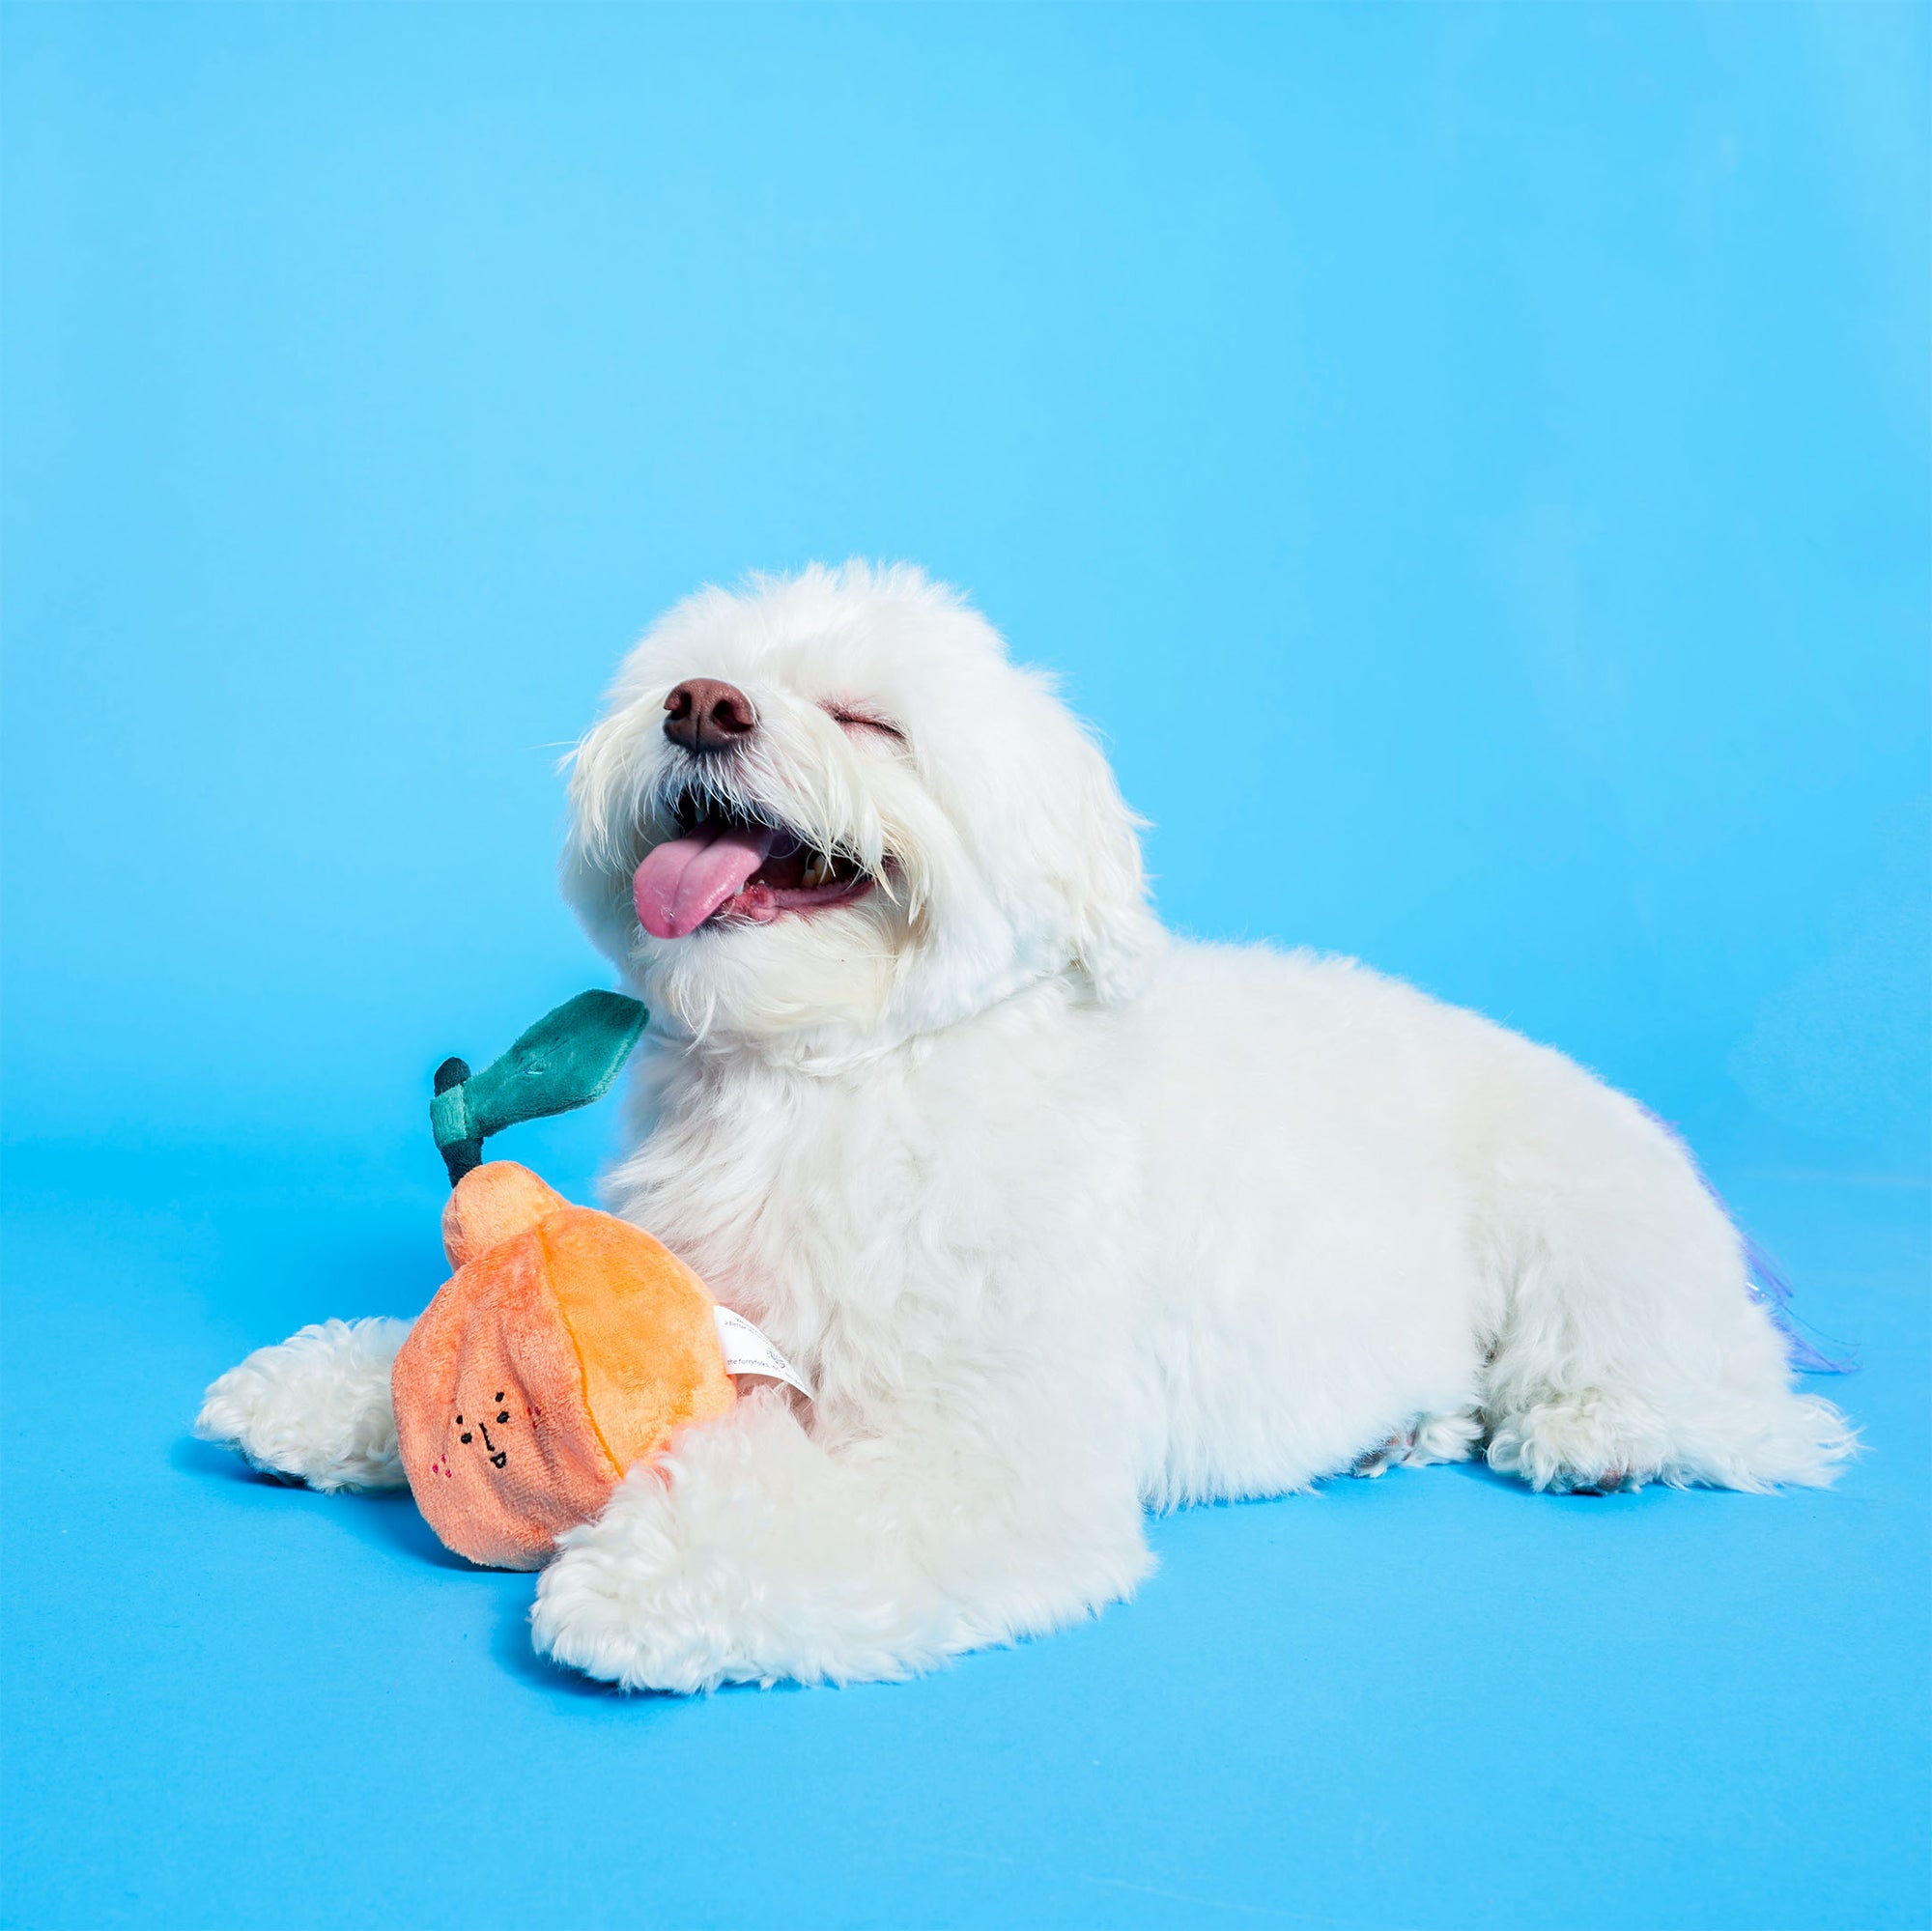 A white fluffy dog lies contentedly on a blue background with an orange-shaped toy next to it, looking very pleased with eyes closed and tongue out.